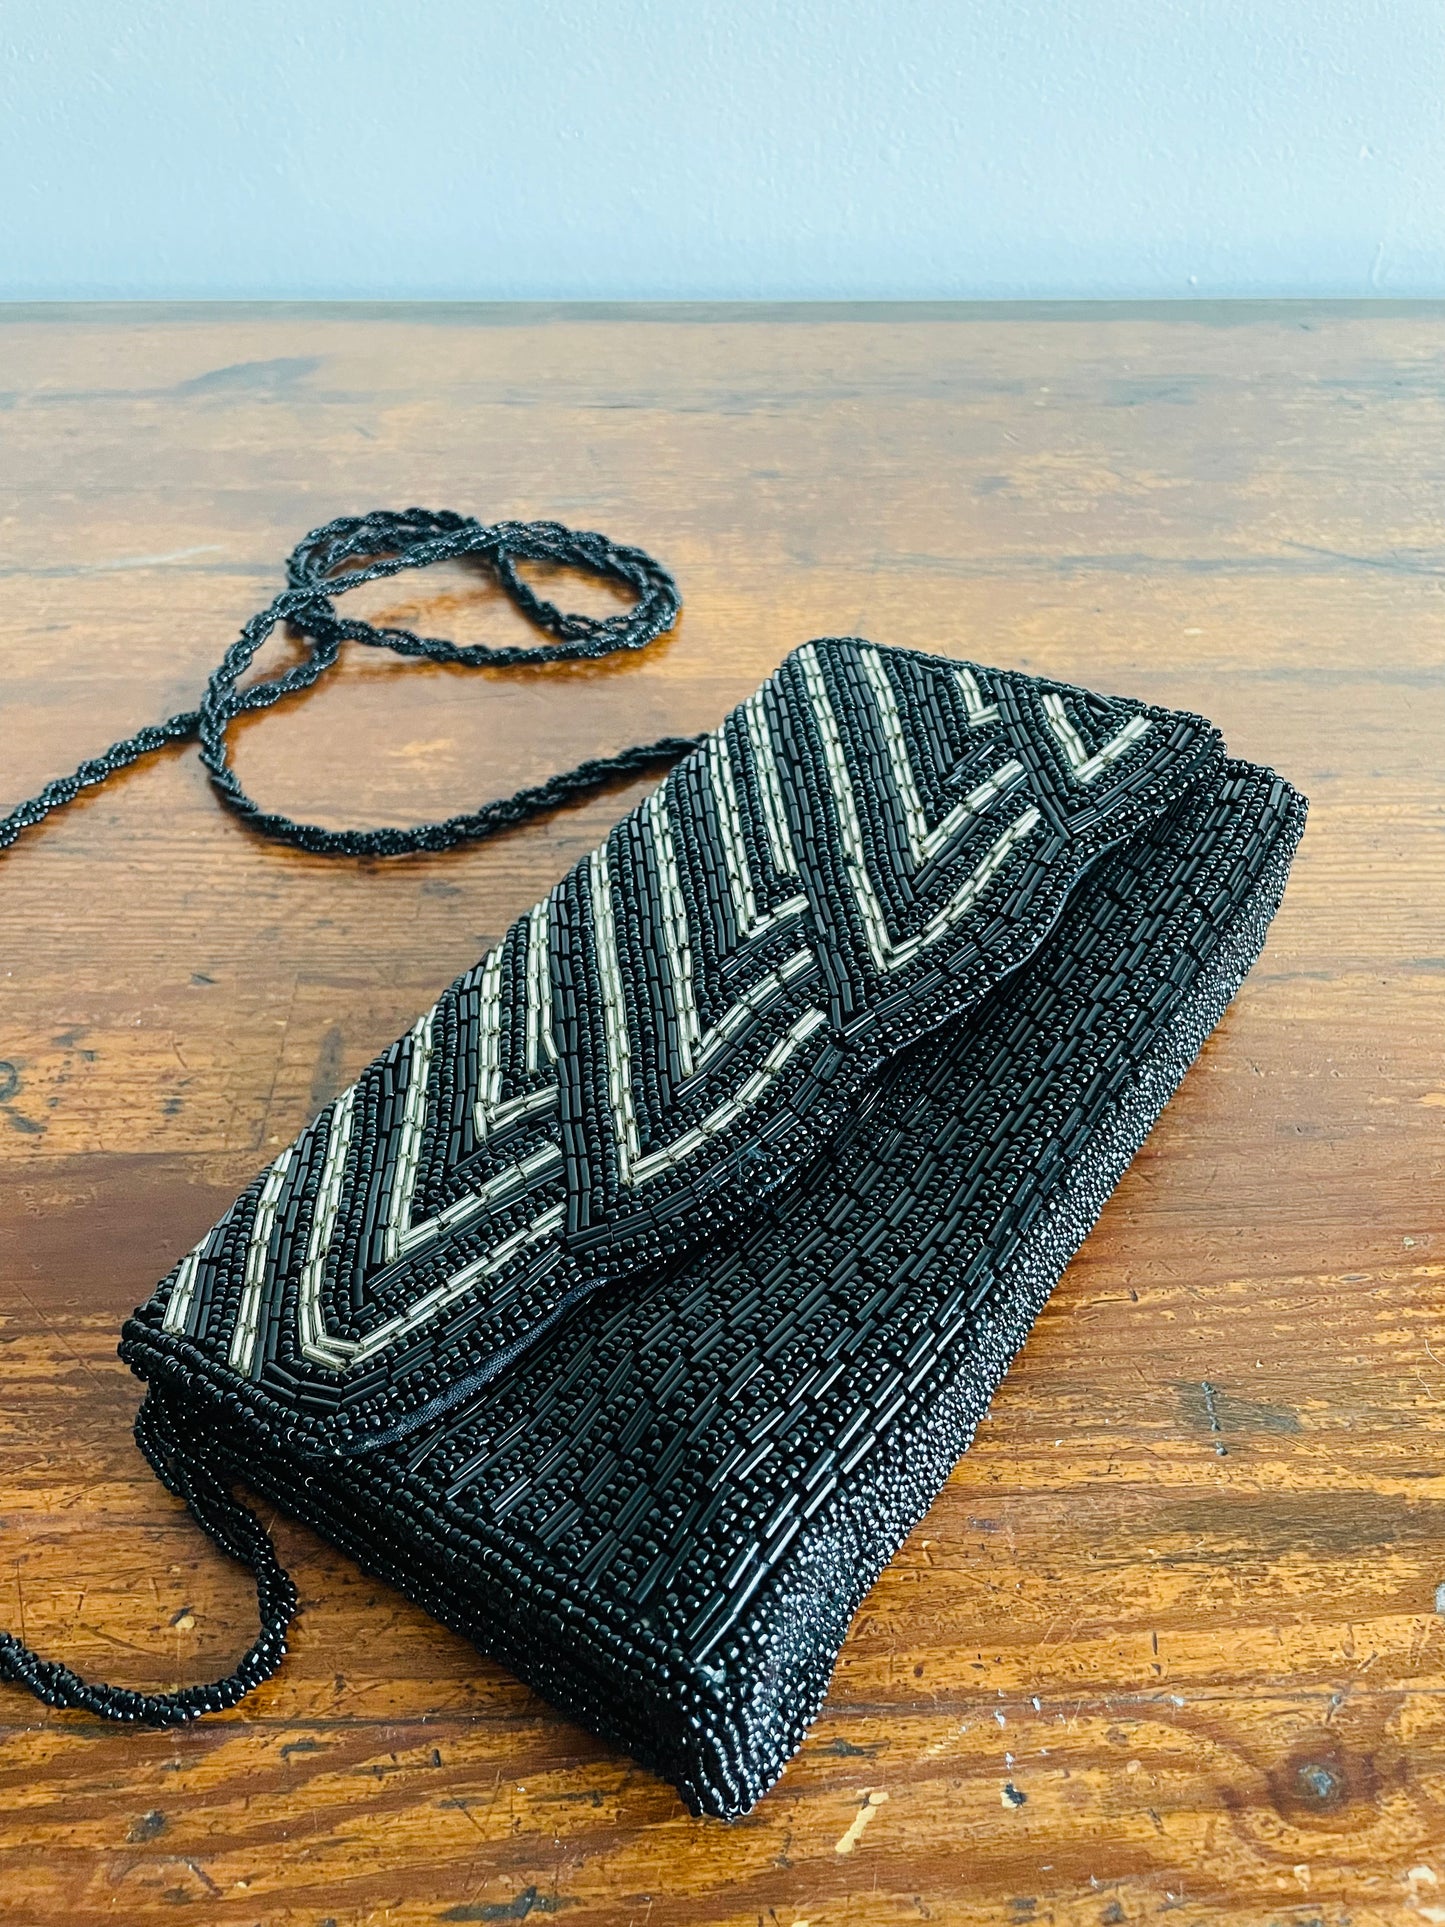 Gorgeous Black & Silver Beaded Clutch Purse with Braided Bead Shoulder Strap